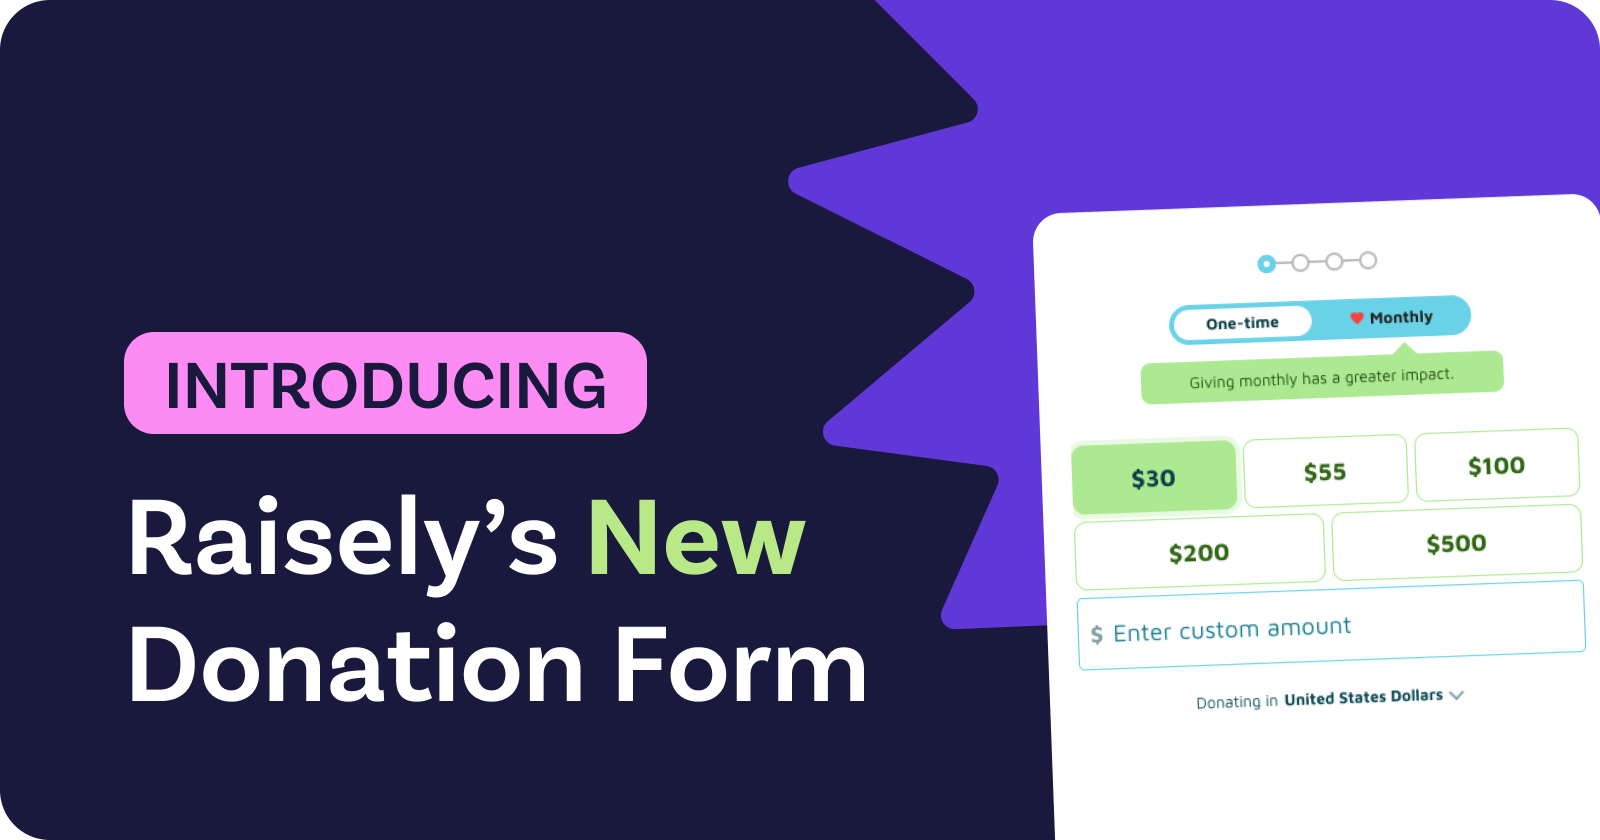 Introducing Raisely’s New Donation Form